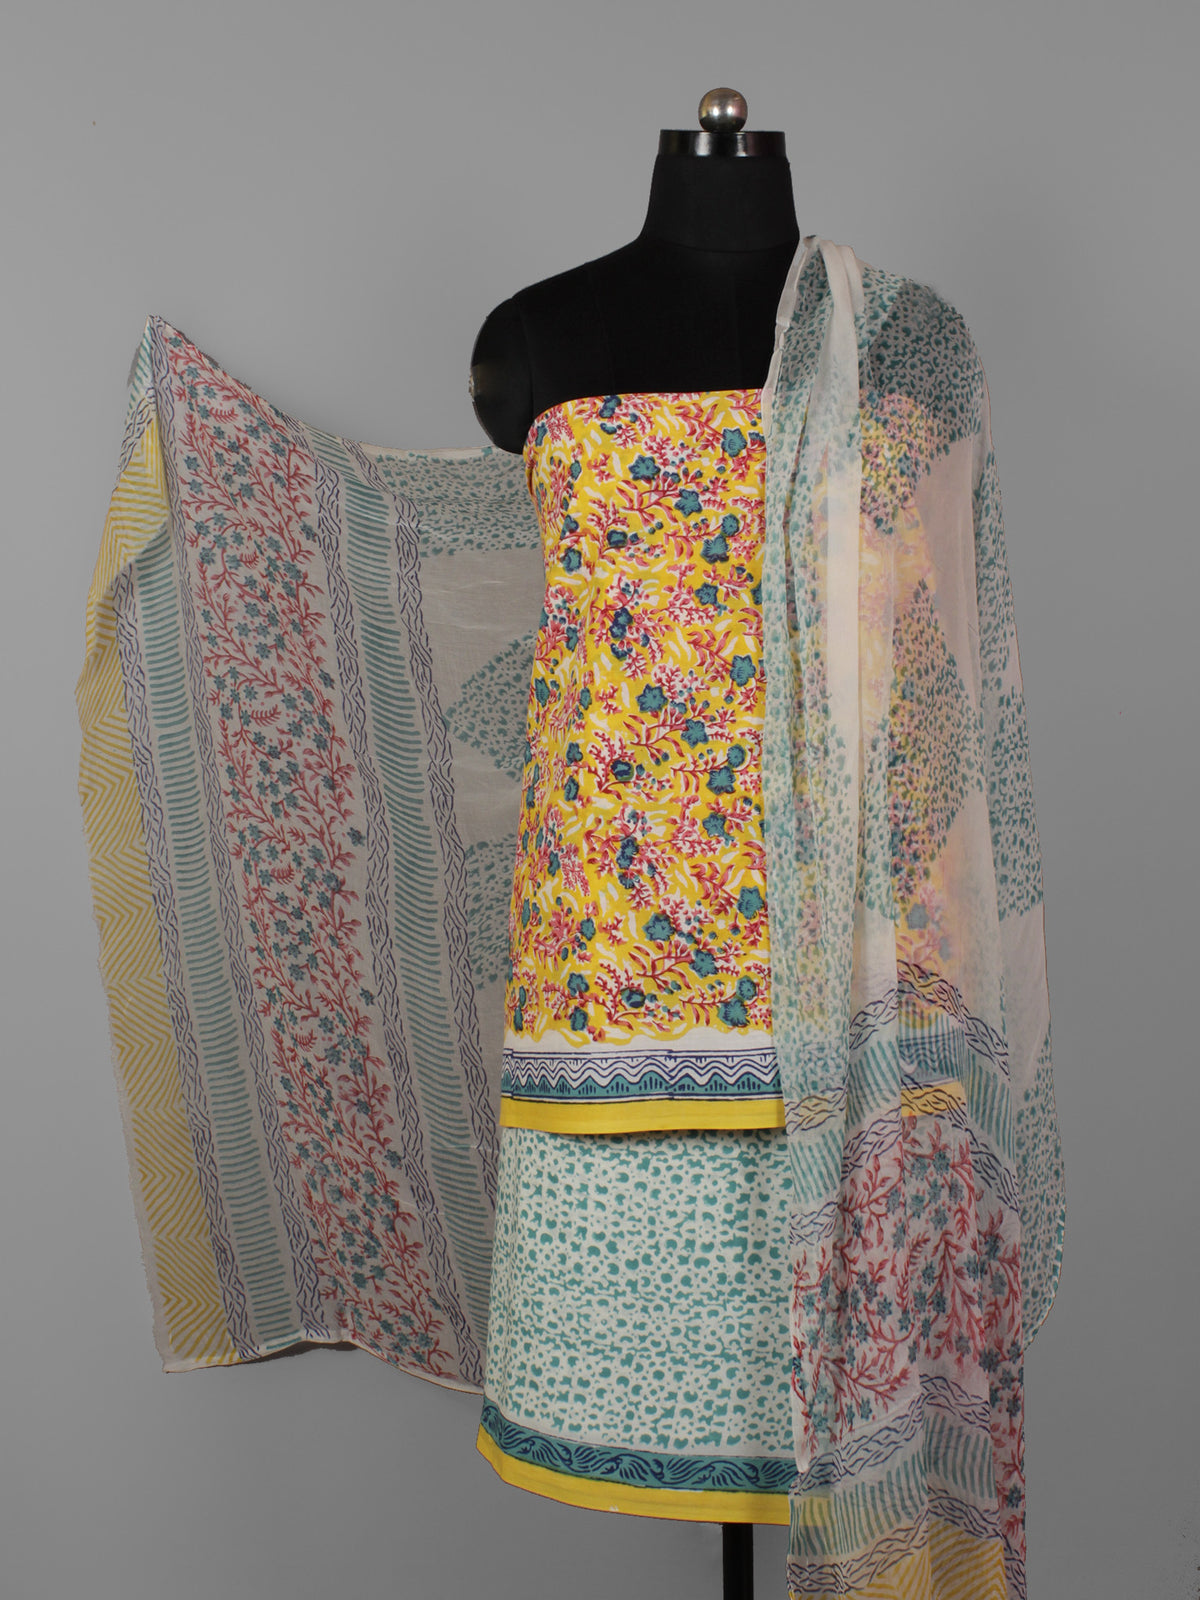 Yellow Ivory Teal Green Hand Block Printed Cotton Suit-Salwar Fabric With Chiffon Dupatta (Set of 3) - S16281315